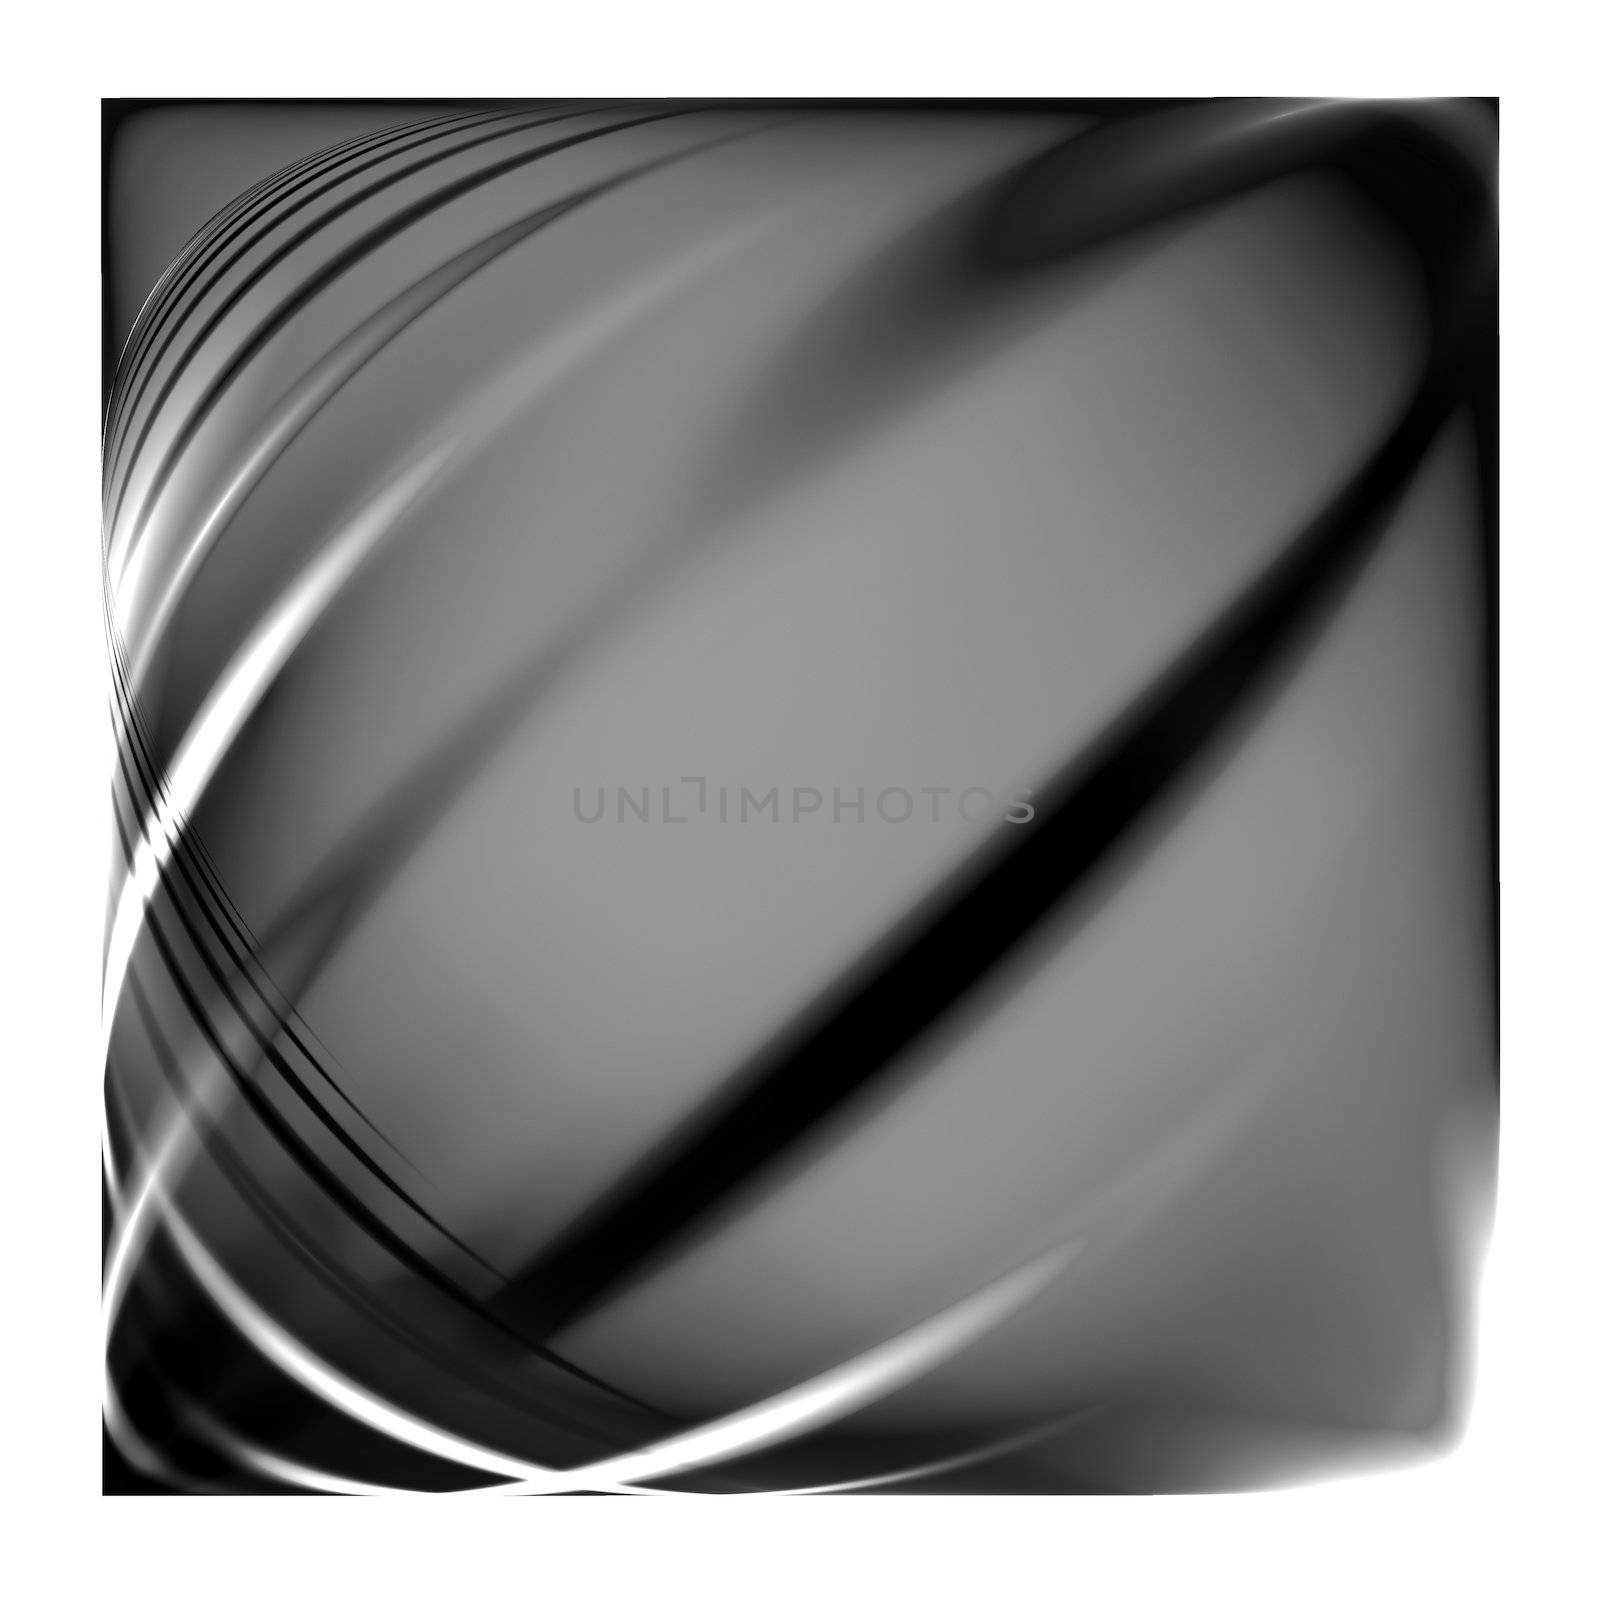 Black and white illustration of abstract background. Beautiful c by mozzyb